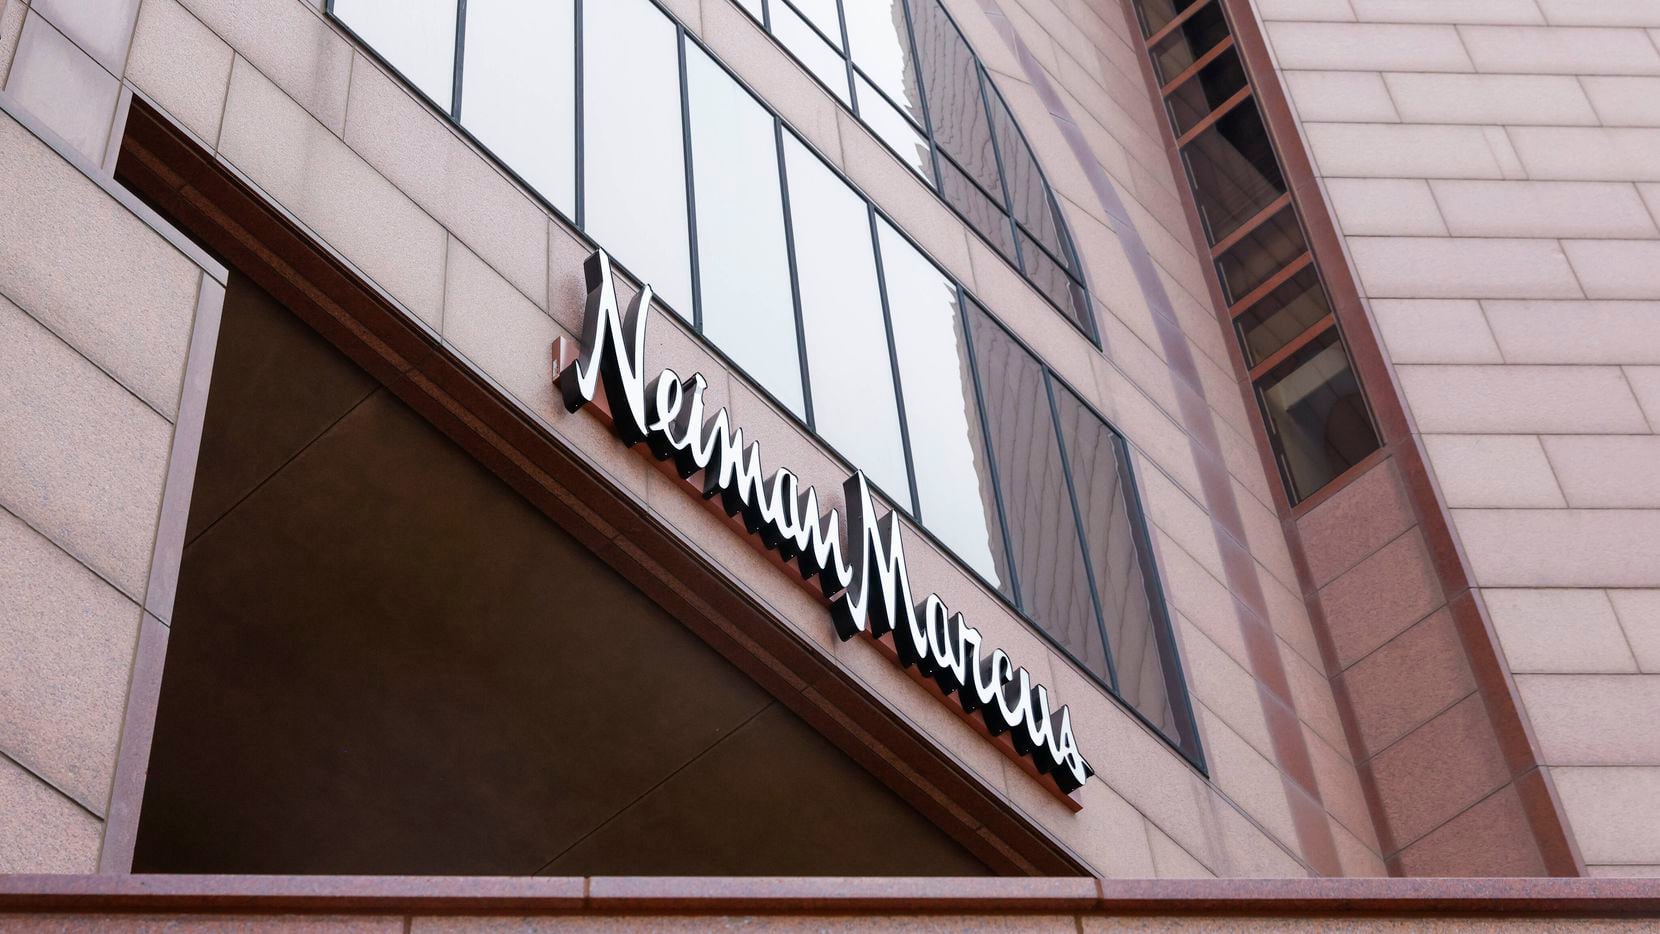 Neiman Marcus' new headquarters is in Cityplace just north of downtown Dallas.